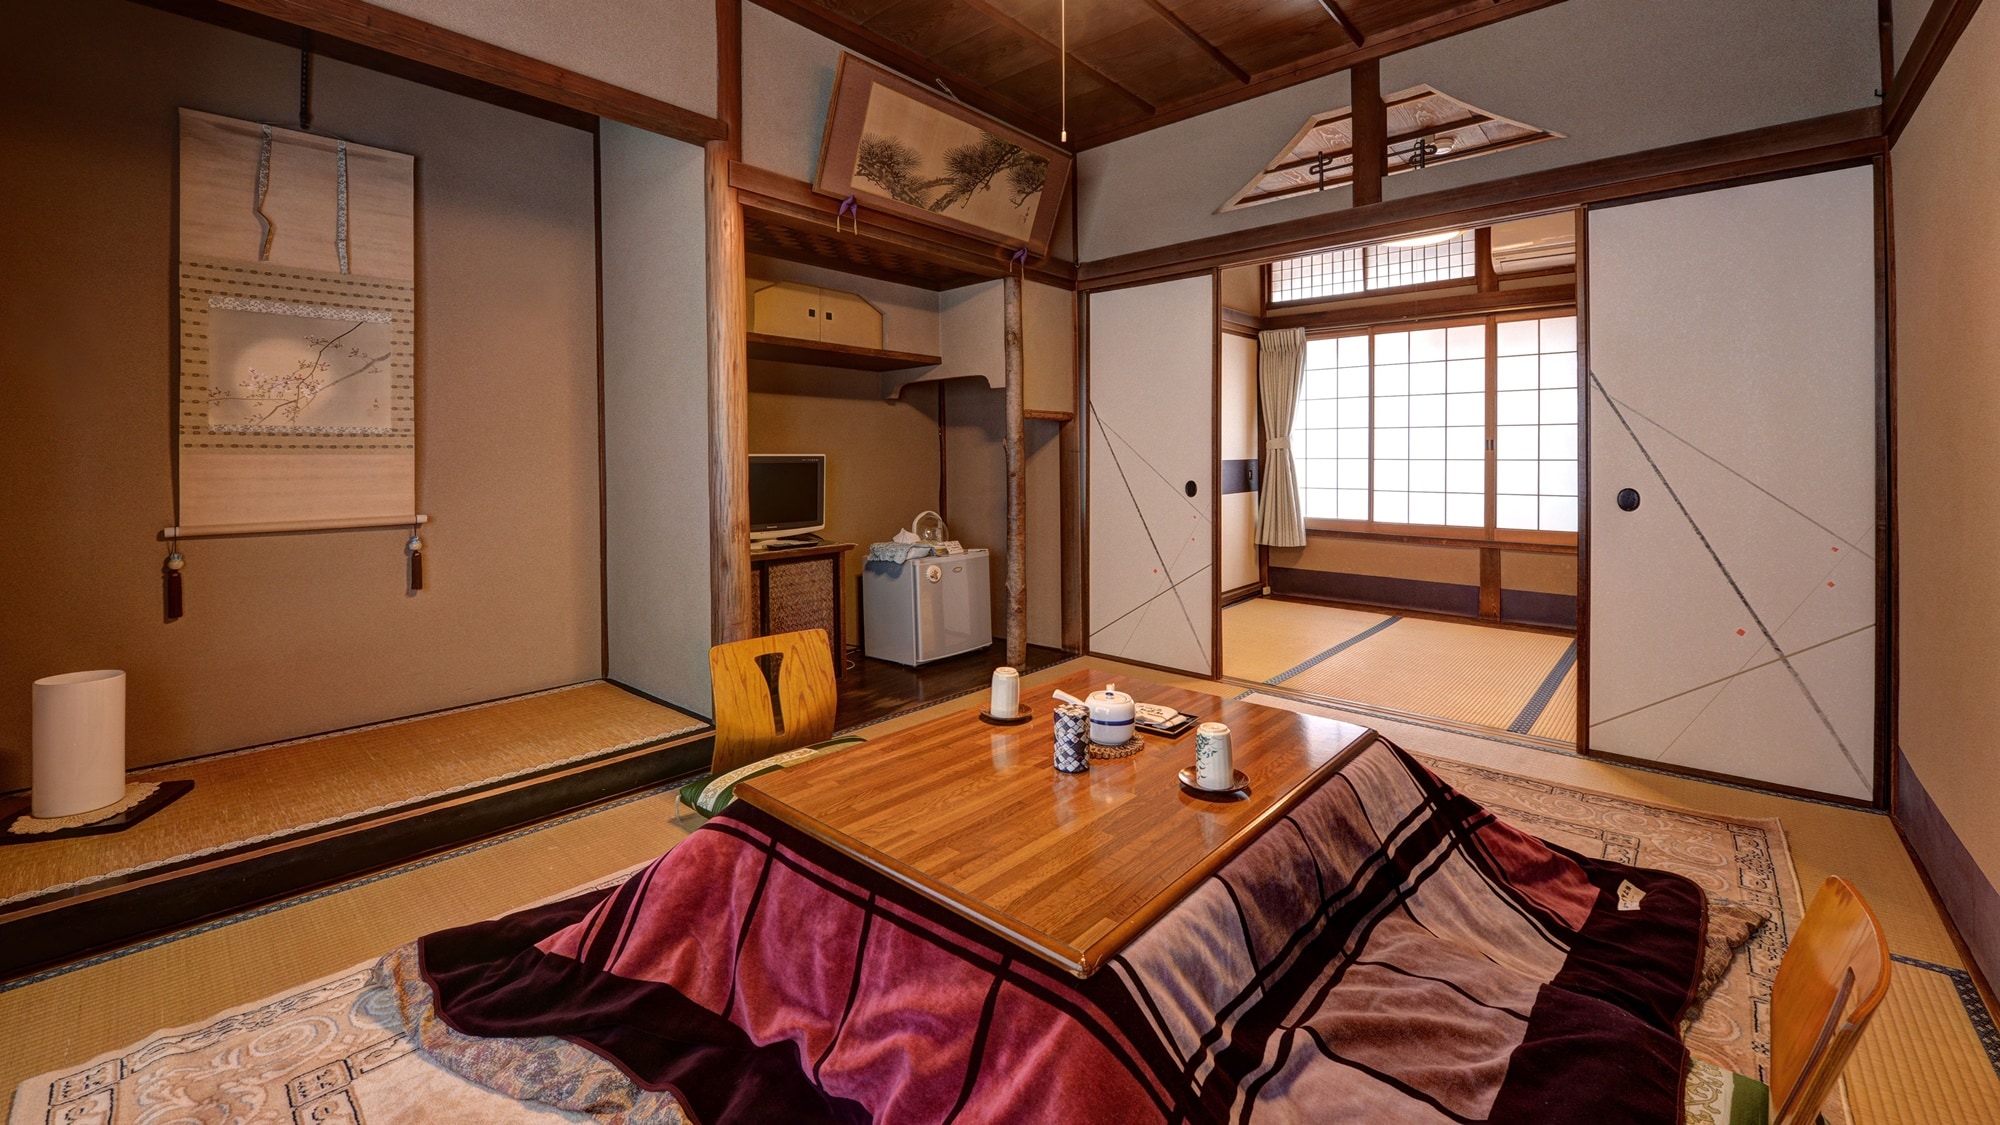 * [Japanese-style room with 6 tatami mats] All rooms have different arrangements.